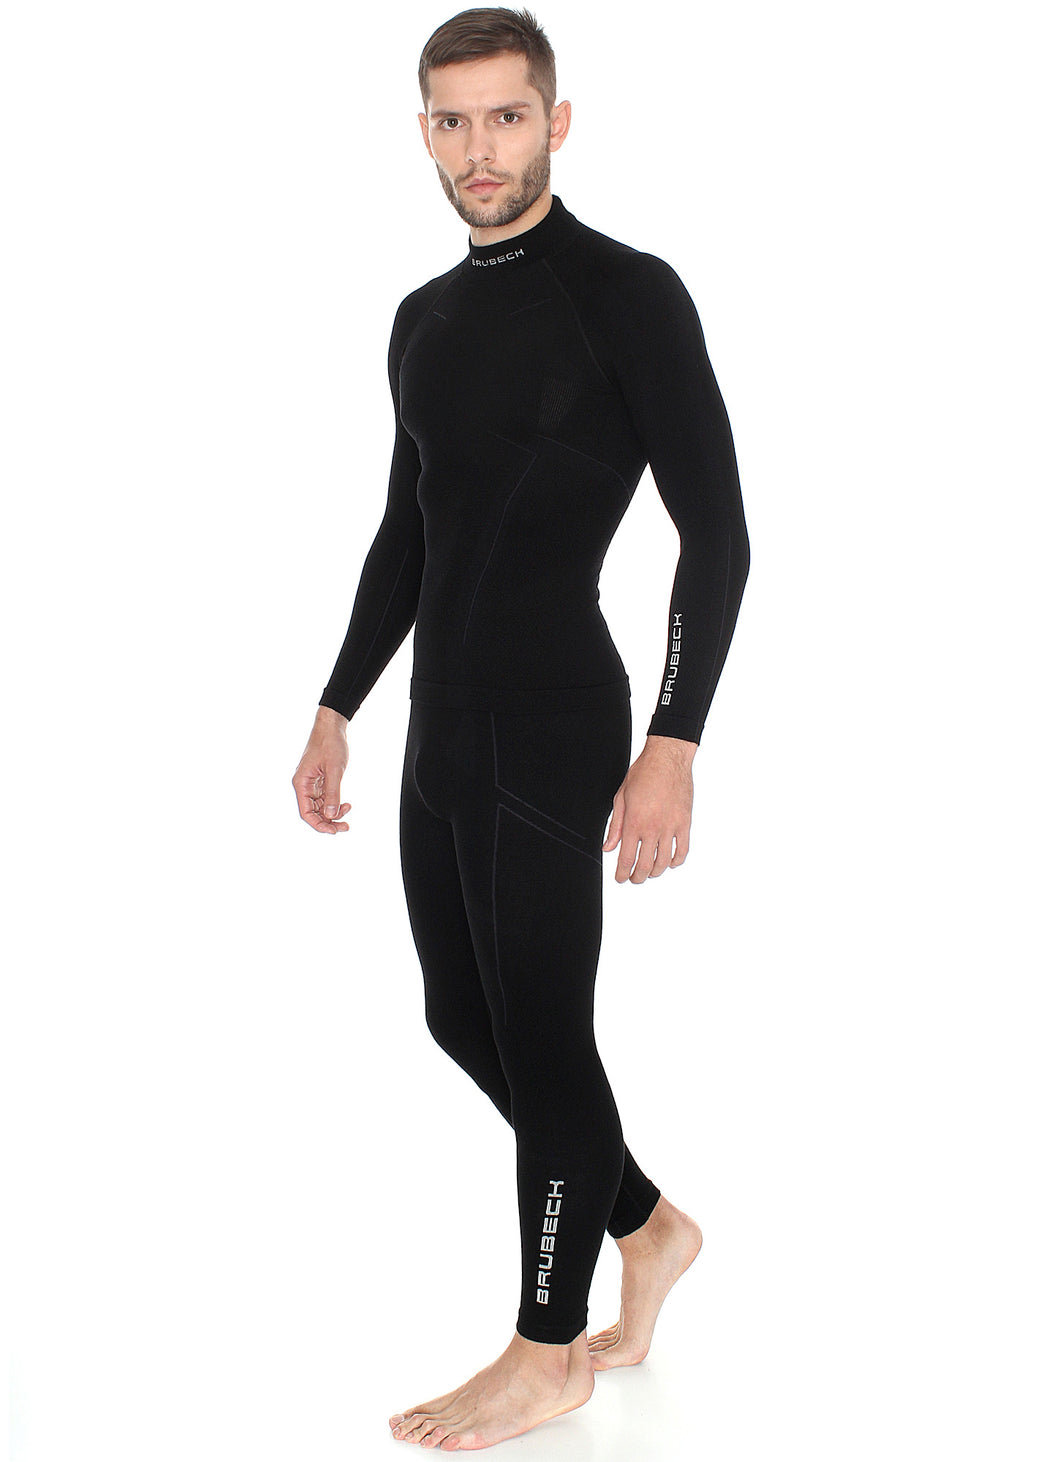 Men's EXTREME WOOL warming black coloured base layer. Built to withstand the most extreme temperatures and conditions